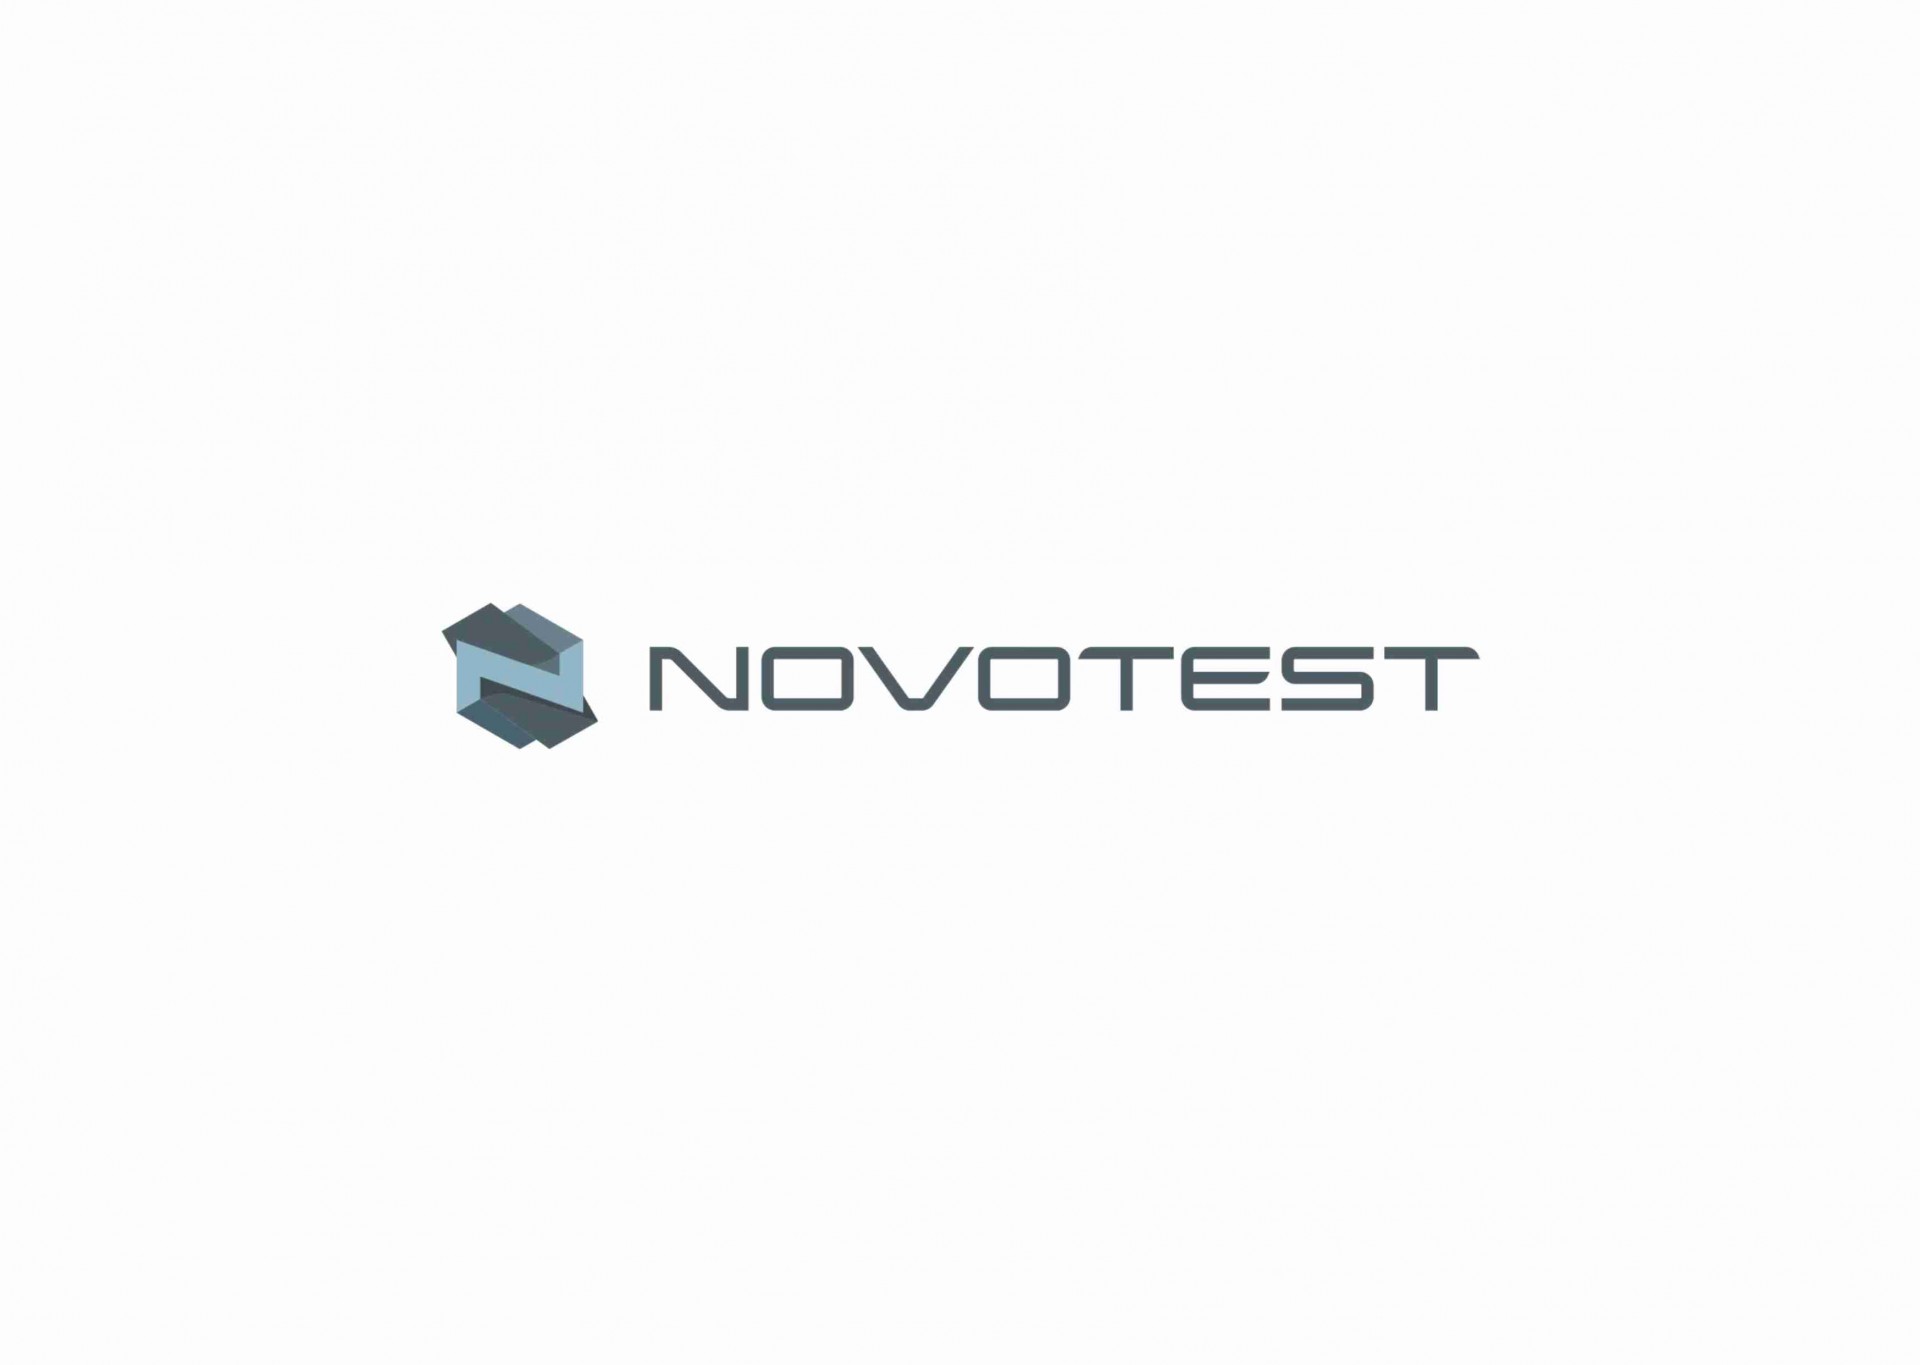 The Only Official Distributor for "NOVOTEST" in Azerbaijan!